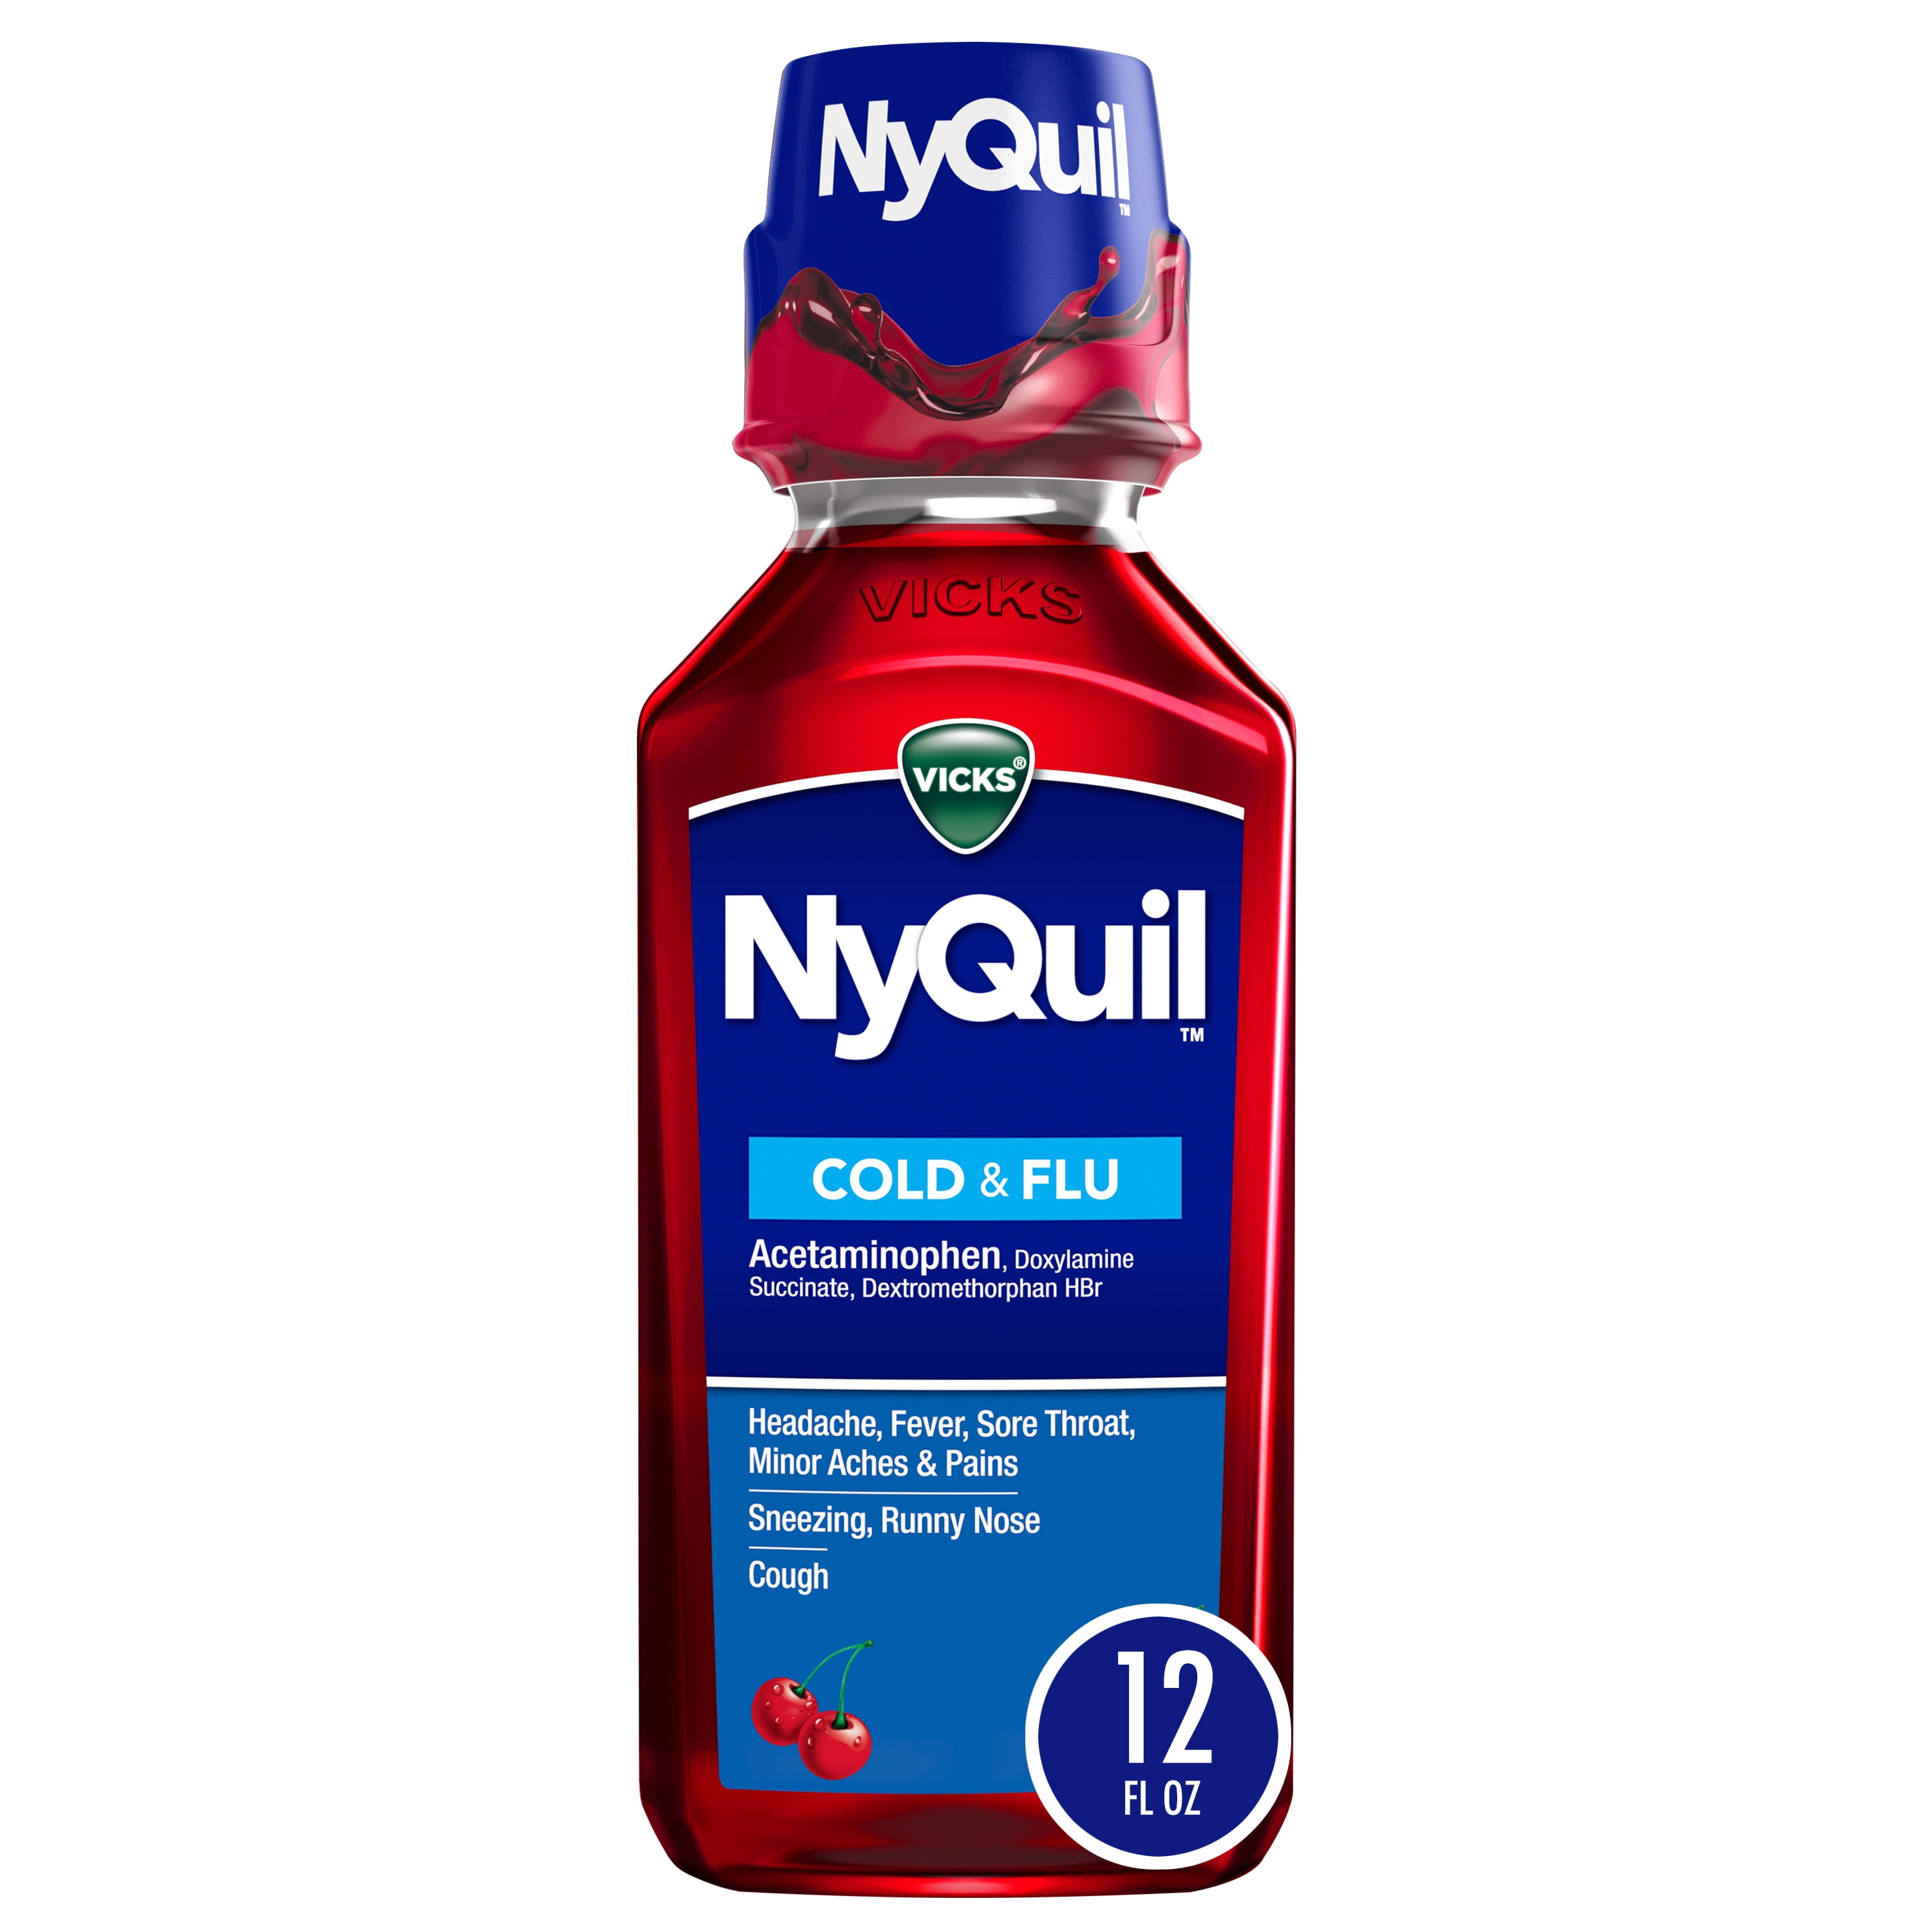 Vicks NyQuil Cold and Flu Relief Liquid Medicine, Over-the-Counter Medicine, Cherry, 12 Oz